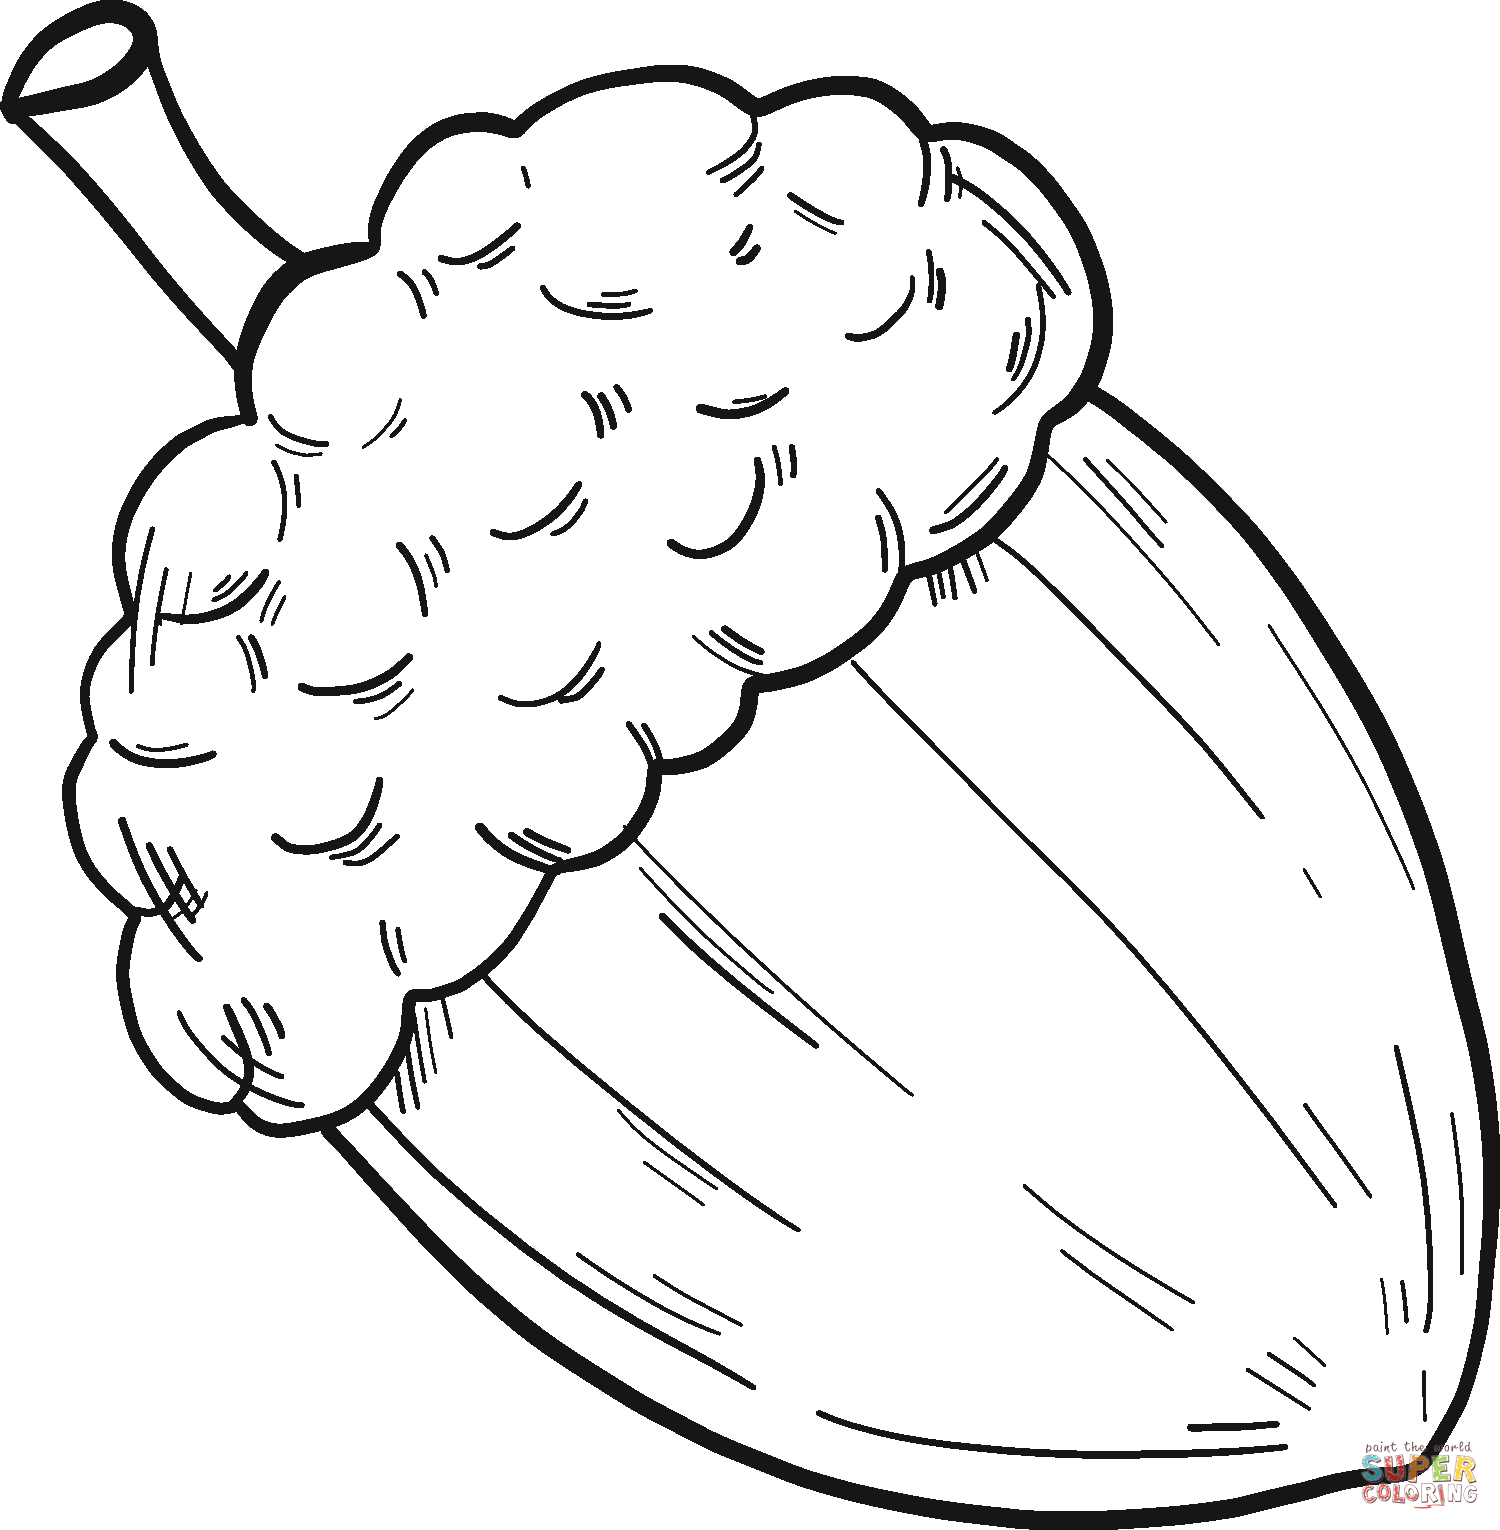 Acorn Coloring Pages   Fall Coloring Pages   Coloring Pages For ...